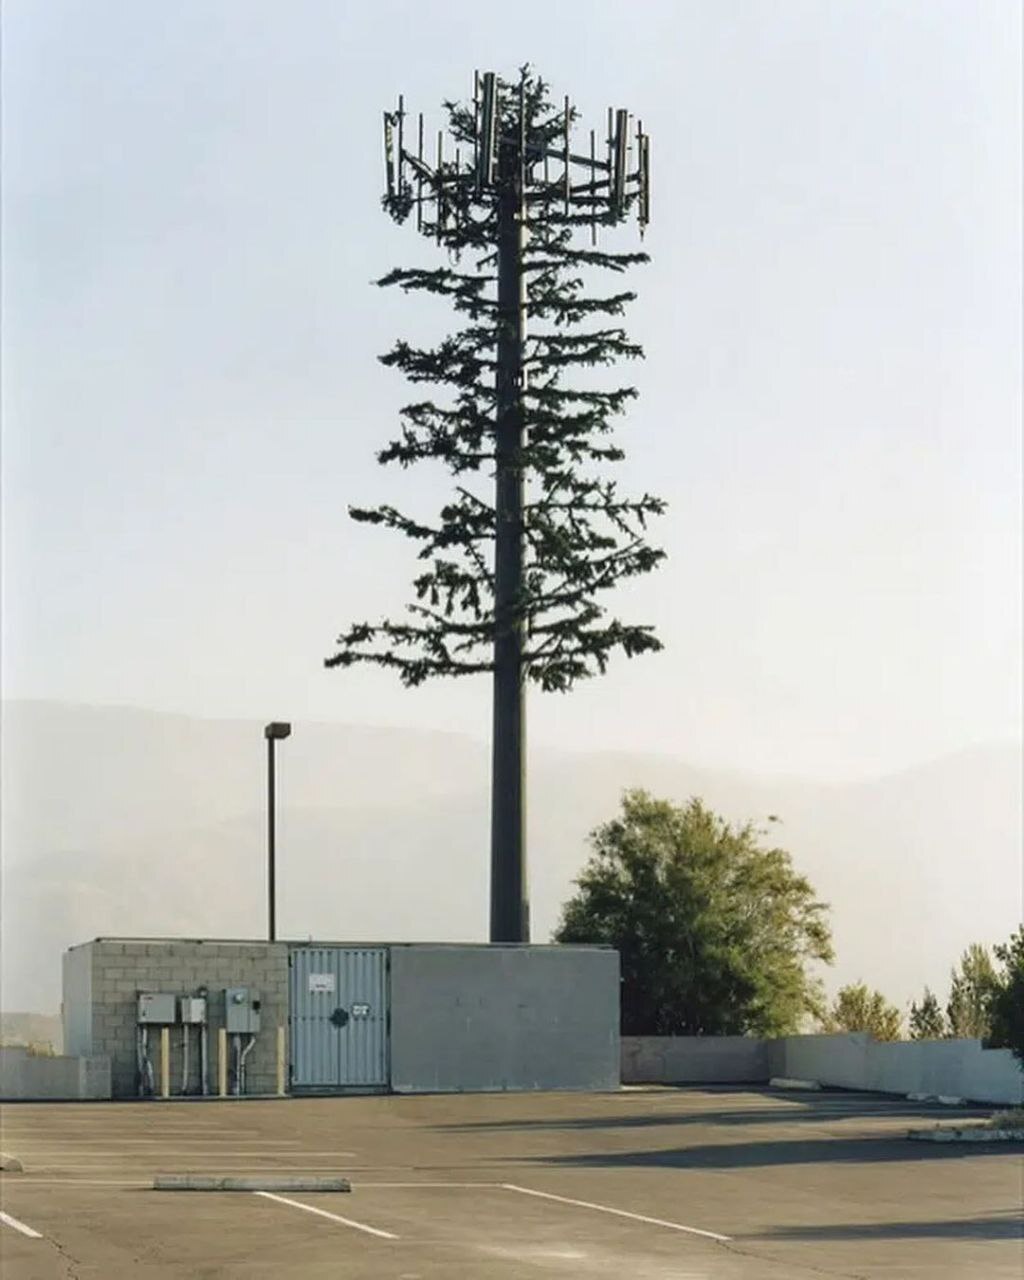 Disguising cell towers - Garden, Plants, Tree, cellular, Cell tower, Landscape design, Electromagnetic radiation, Radiation, Disguise, Technologies, Technics, Connection, Longpost